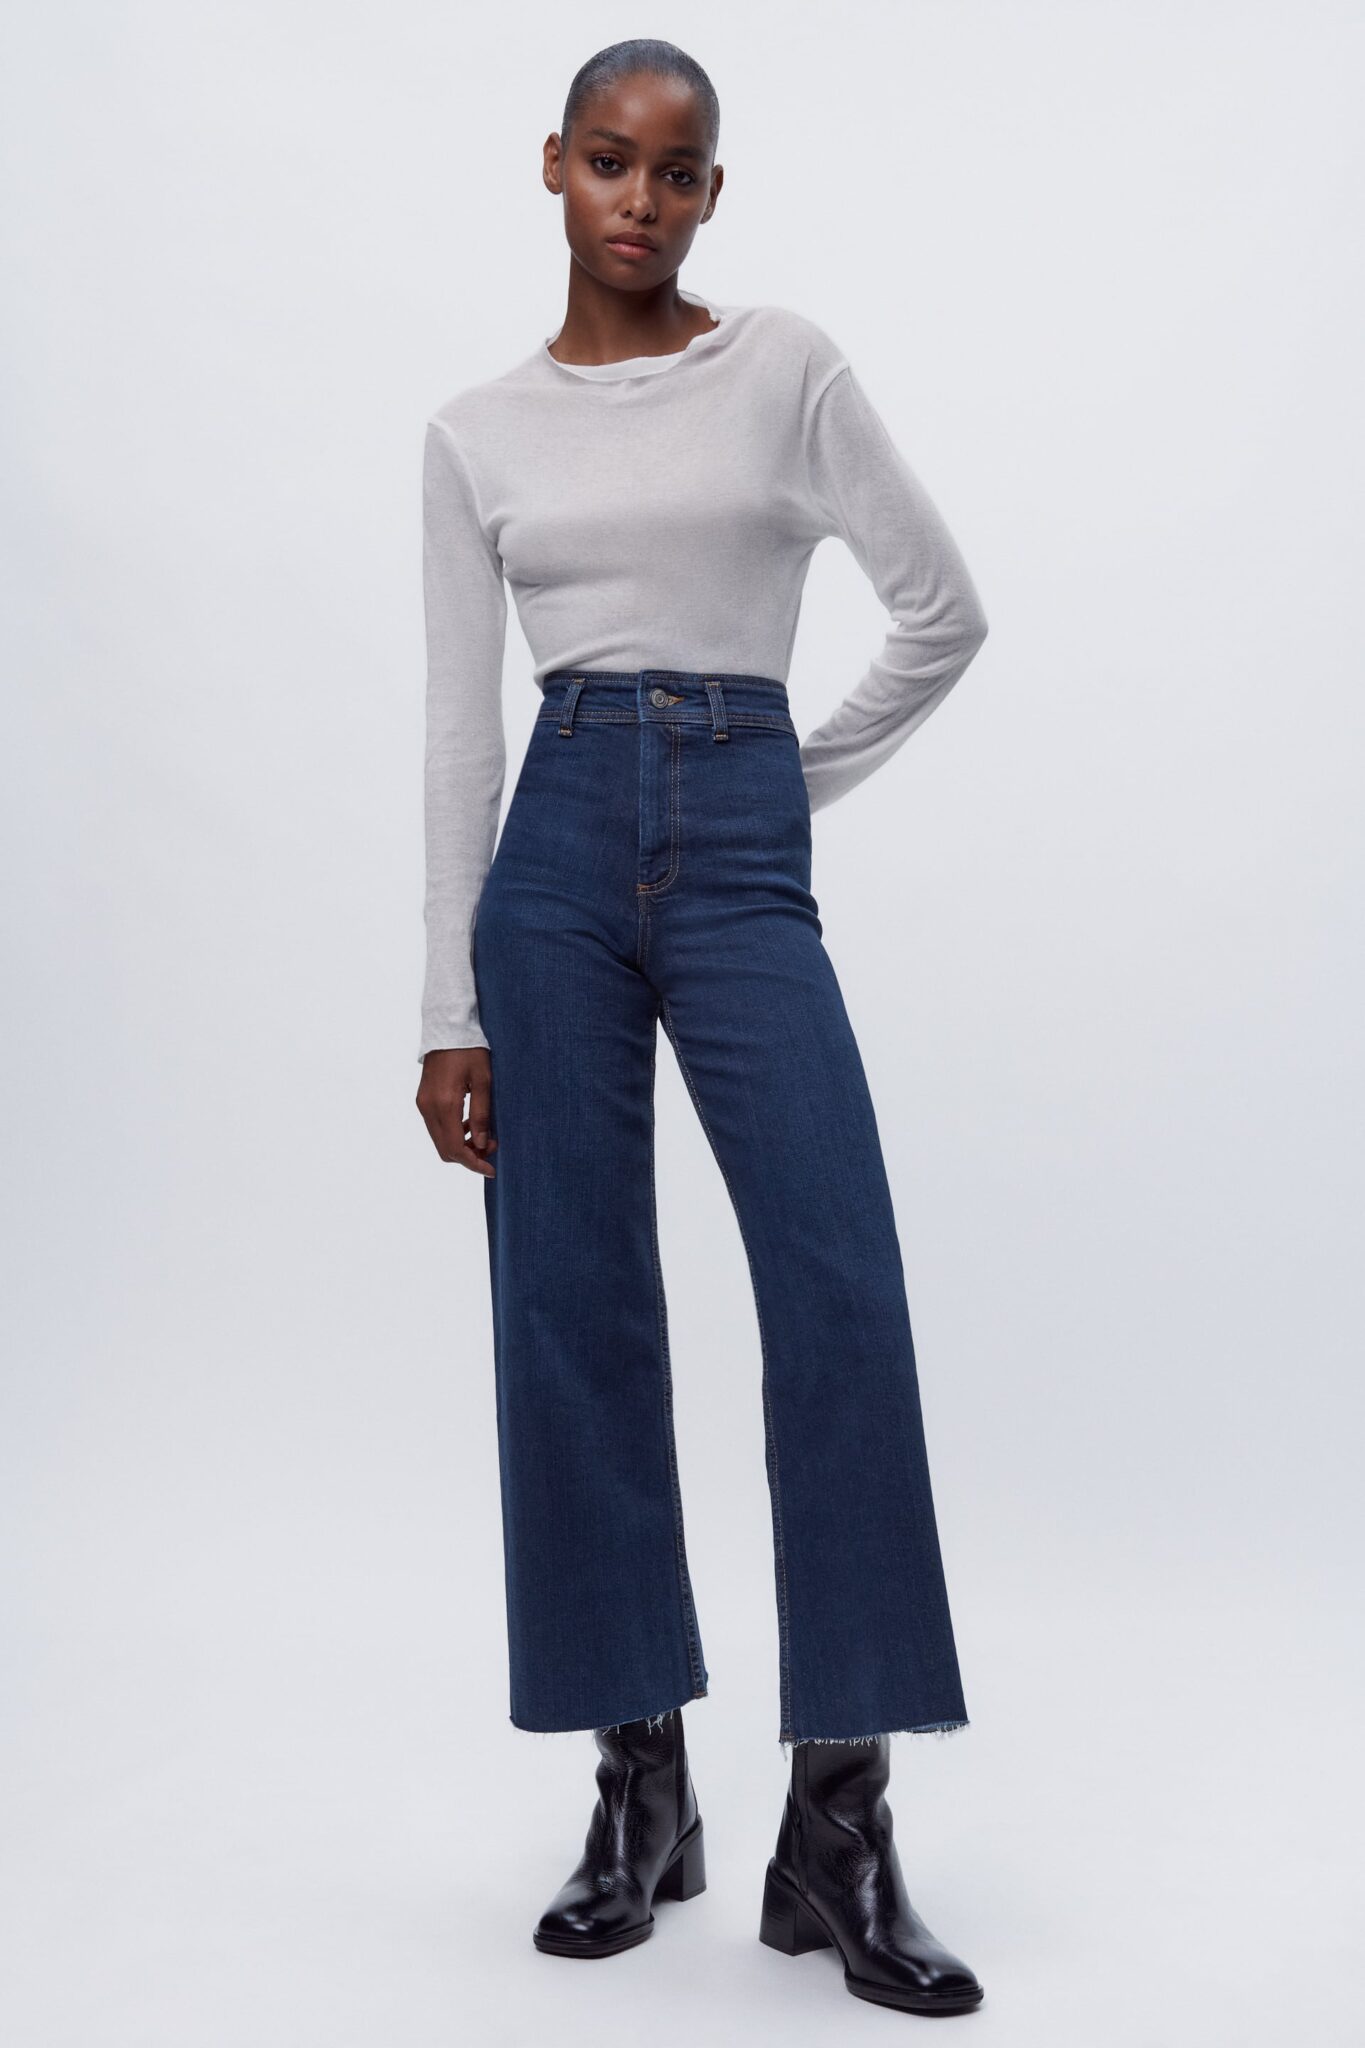 The Everlasting Trend: UAE's Obsession with High-Waisted Jeans